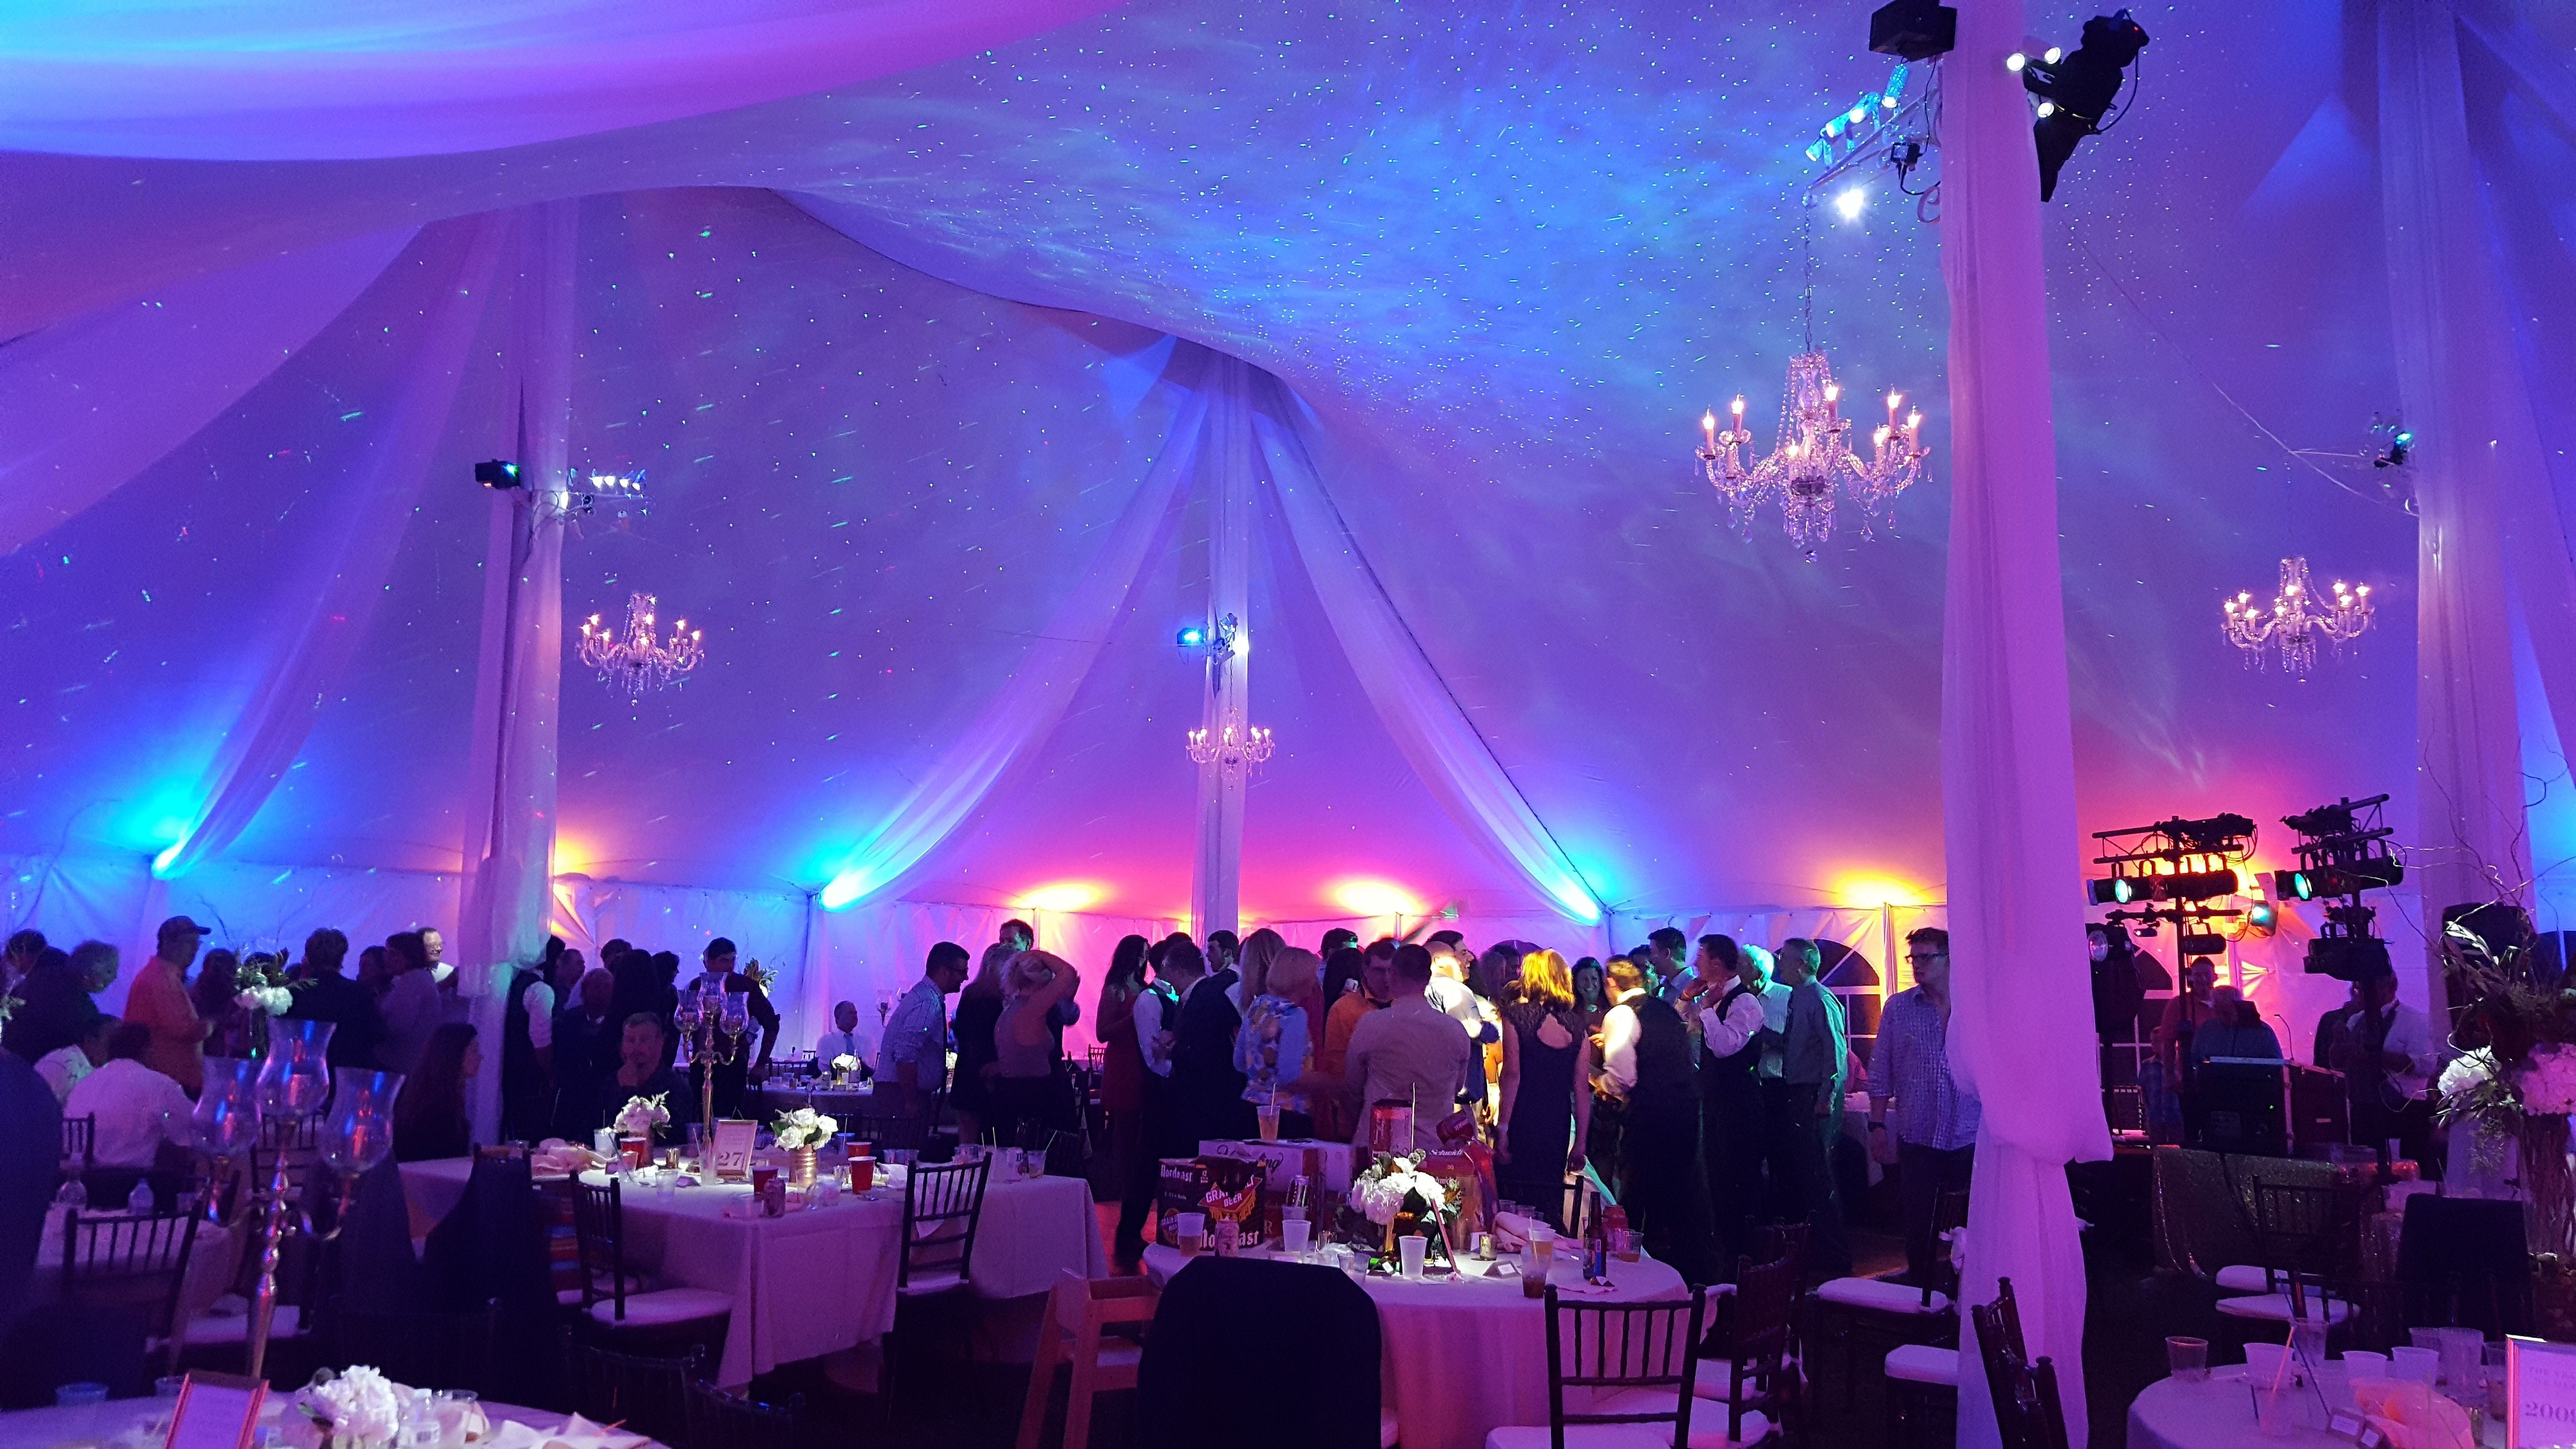 Wedding lighting in a tent with up lighting and chandeliers by Duluth Event Lighting.